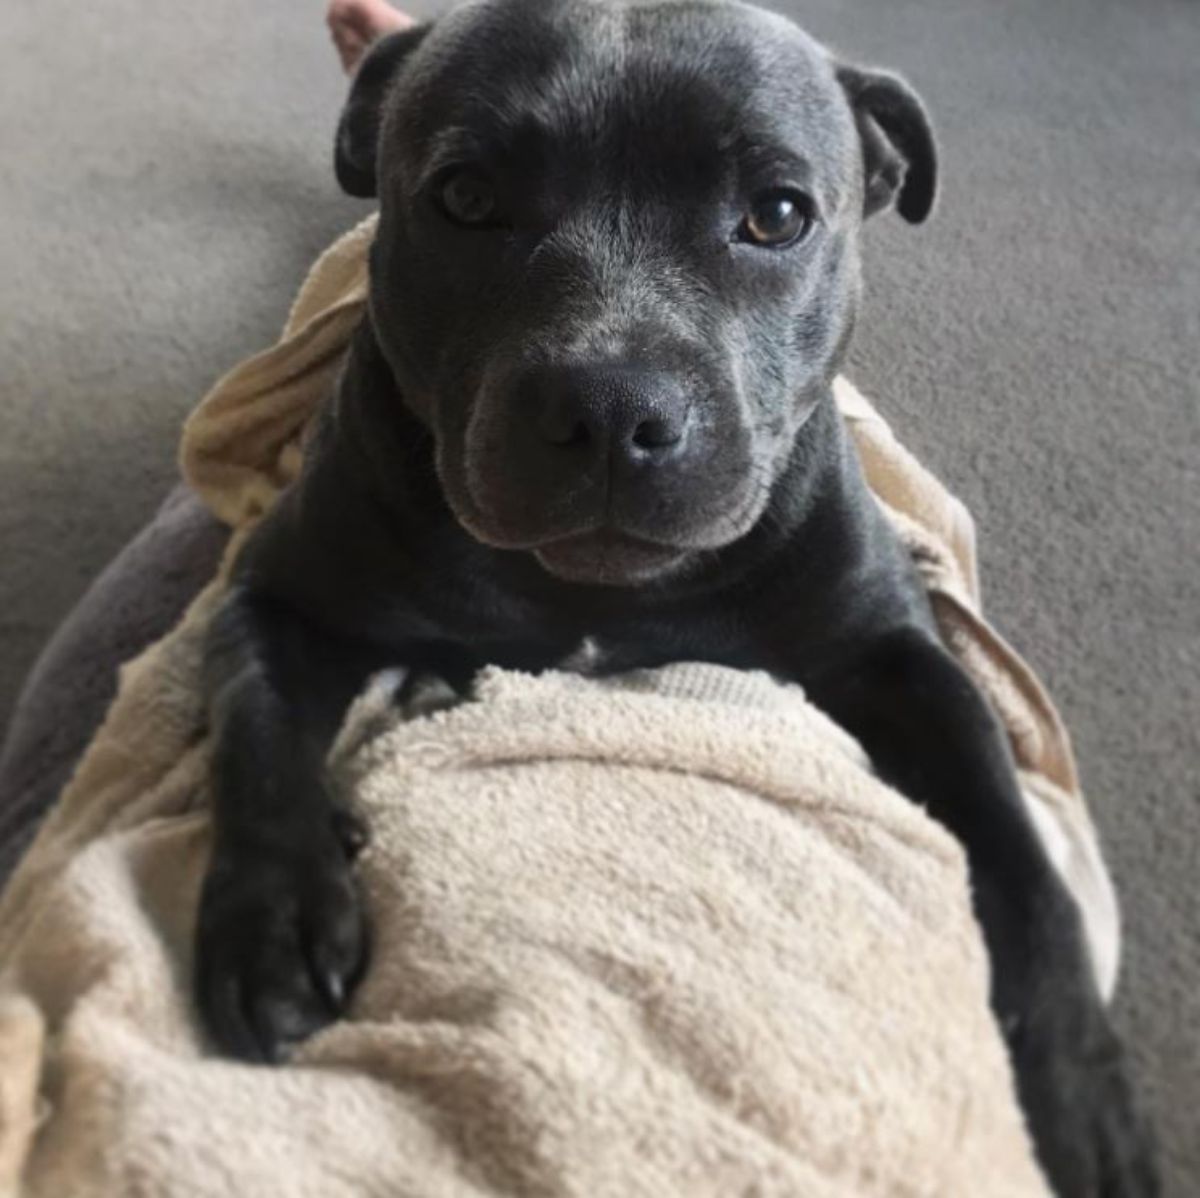 Staffordshire Bull Terrier puppy wrapped in towel on top of its owner's legs